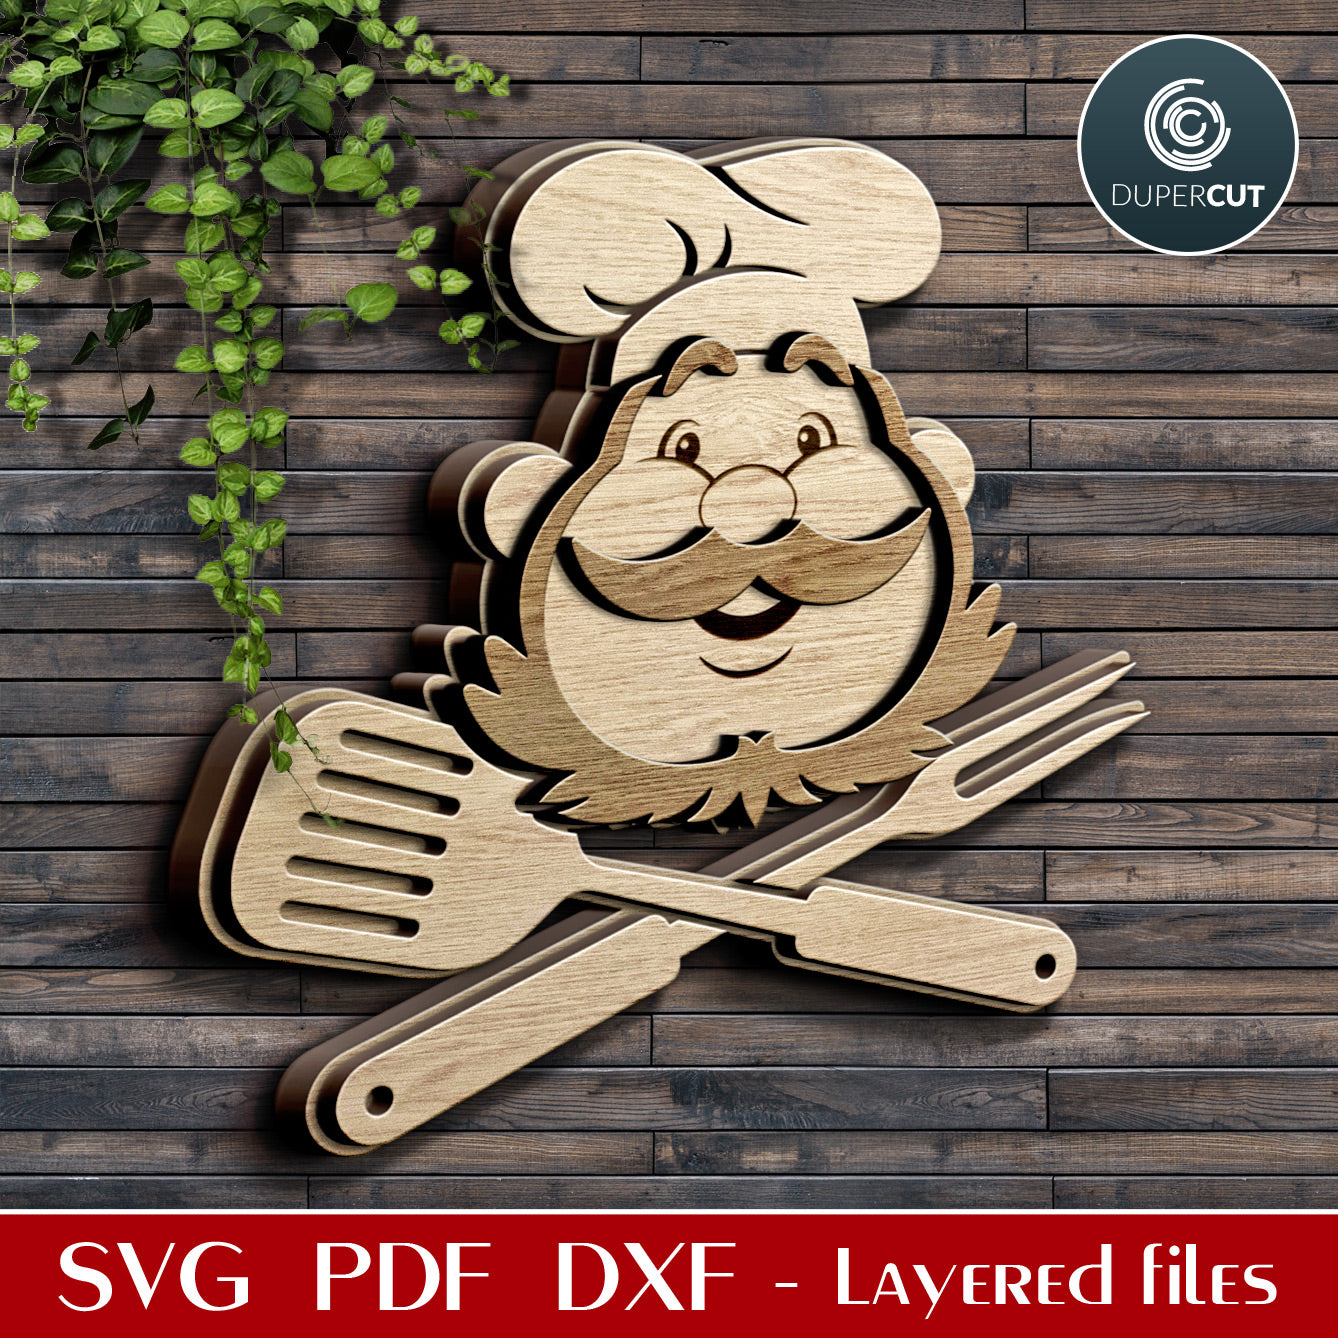 Chef sign kitchen decoration gift - SVG layered cut files for Glowforge, Cricut, X-tool, laser cut, scroll saw pattern by www.DuperCut.com